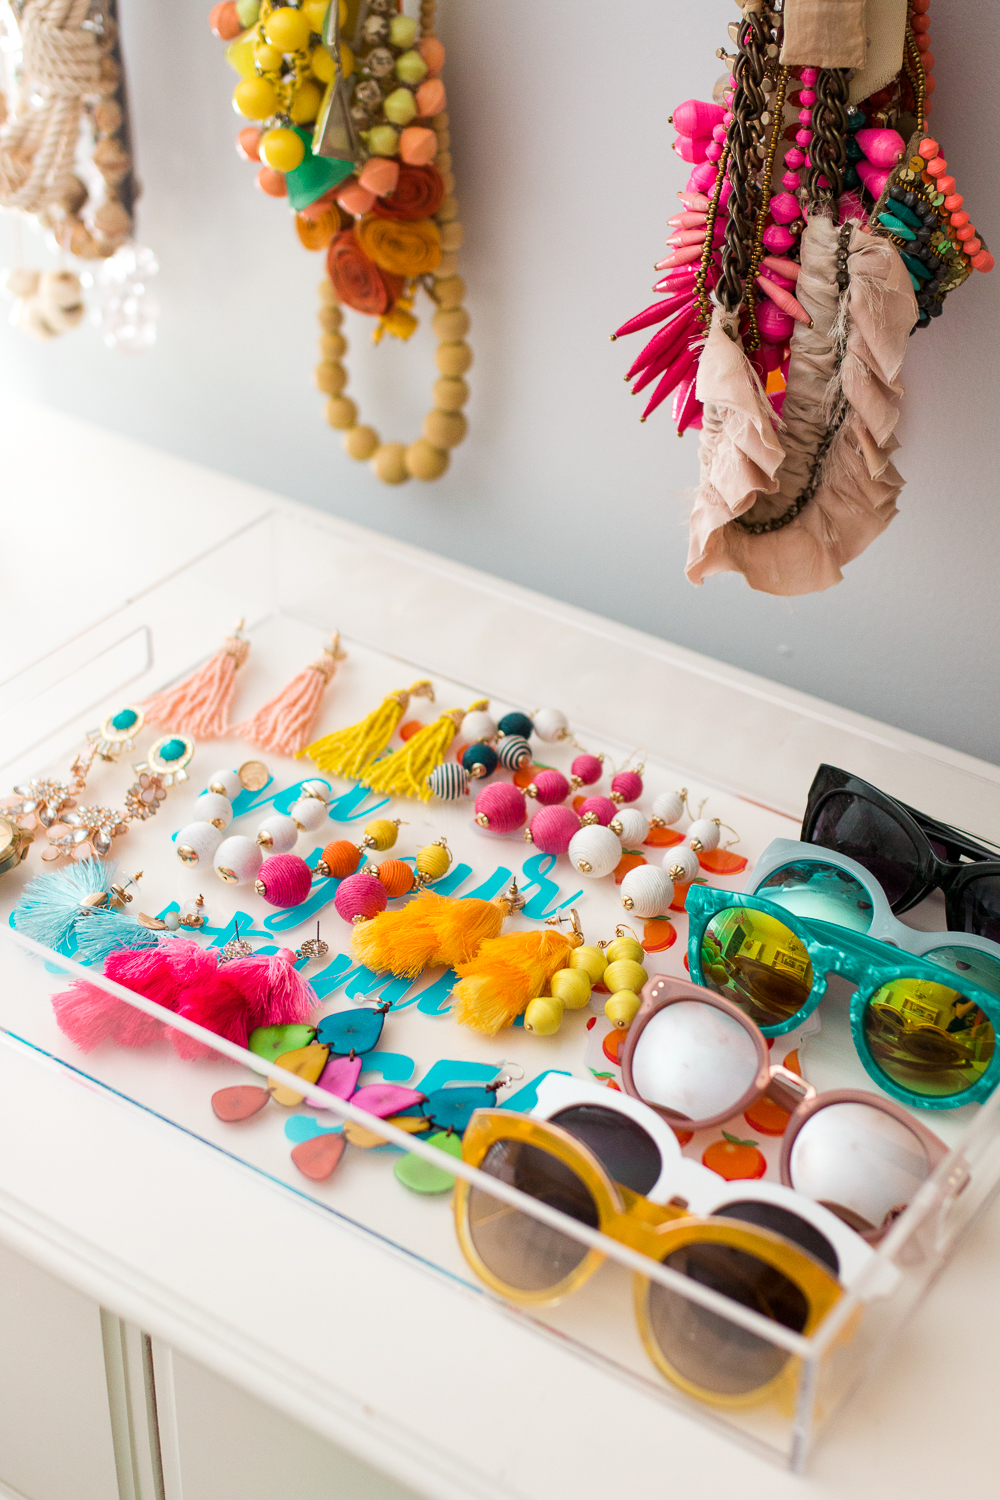 How to Organize Jewelry, Accessorizes and Makeup in a Small Space | 5 Easy Tips or Organize a Small Bedroom by Sunshine Style a Florida Fashion & Lifestyle Blog | Organization Tips | Small Bedroom Decor | Boho Decor | Tropical Bedroom Decor #decor #organize #organization #bedroom #decorate